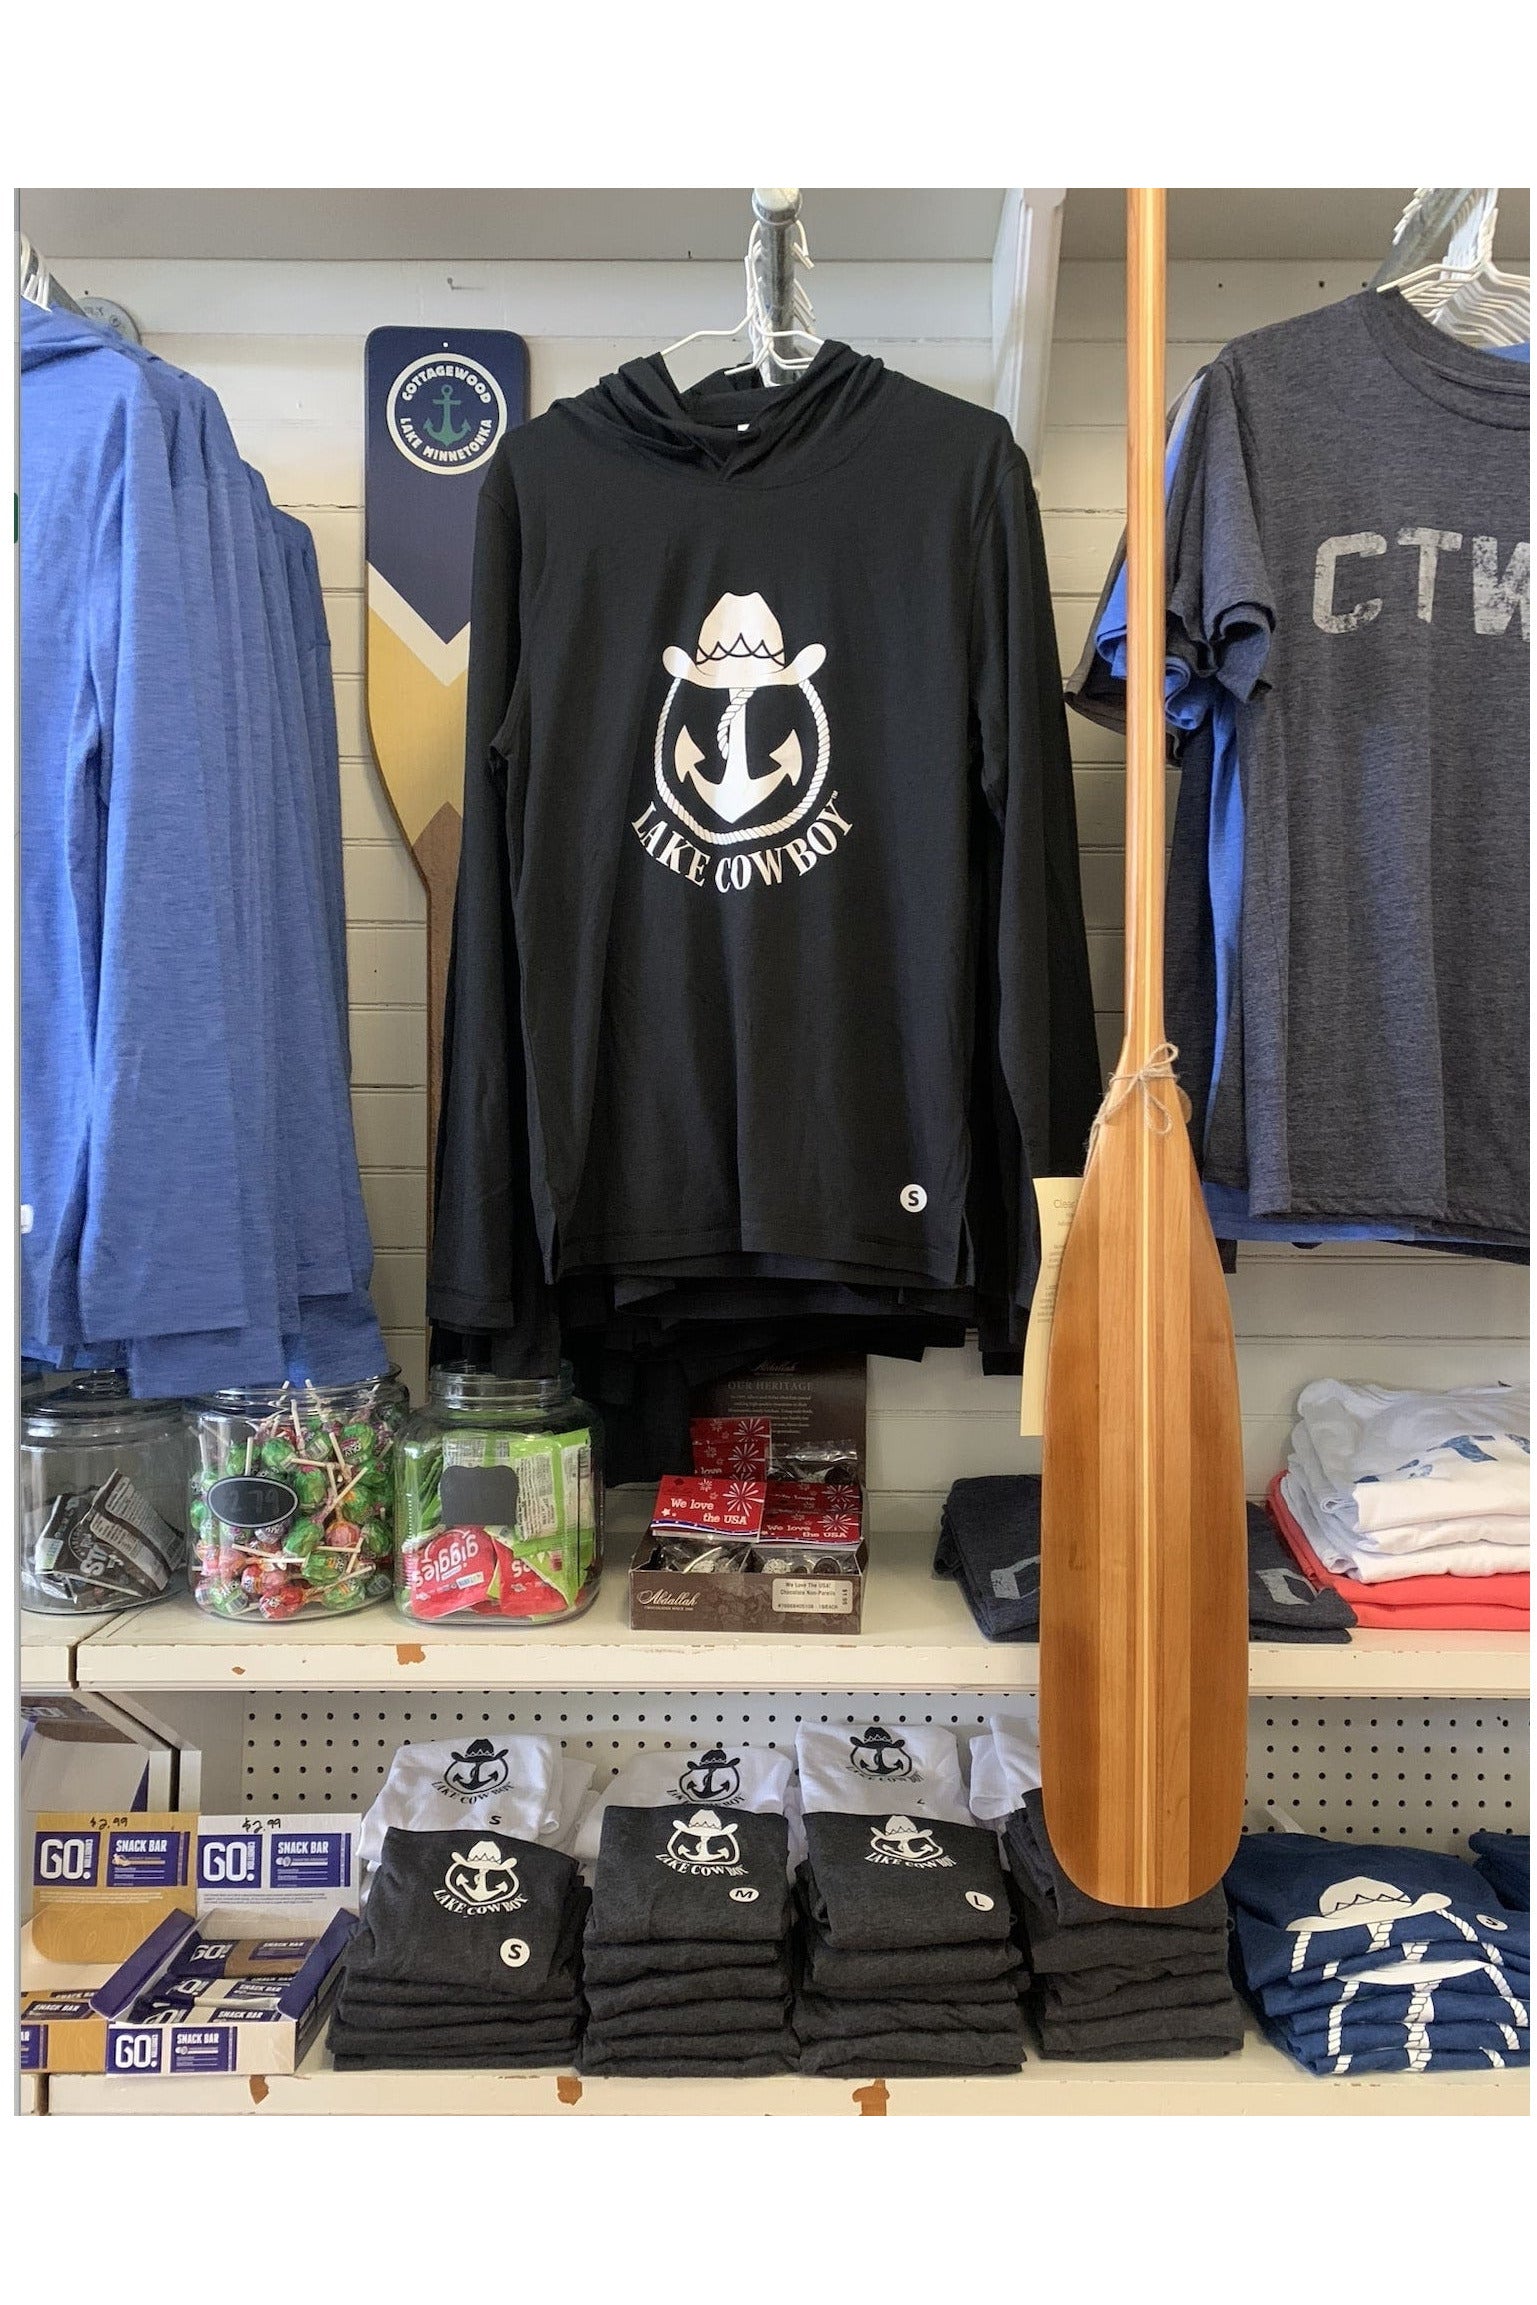 Photo of Lake Cowboy Long Sleeve Hoodie (Black) on display at the Cottagewood General Store in Deephaven, MN